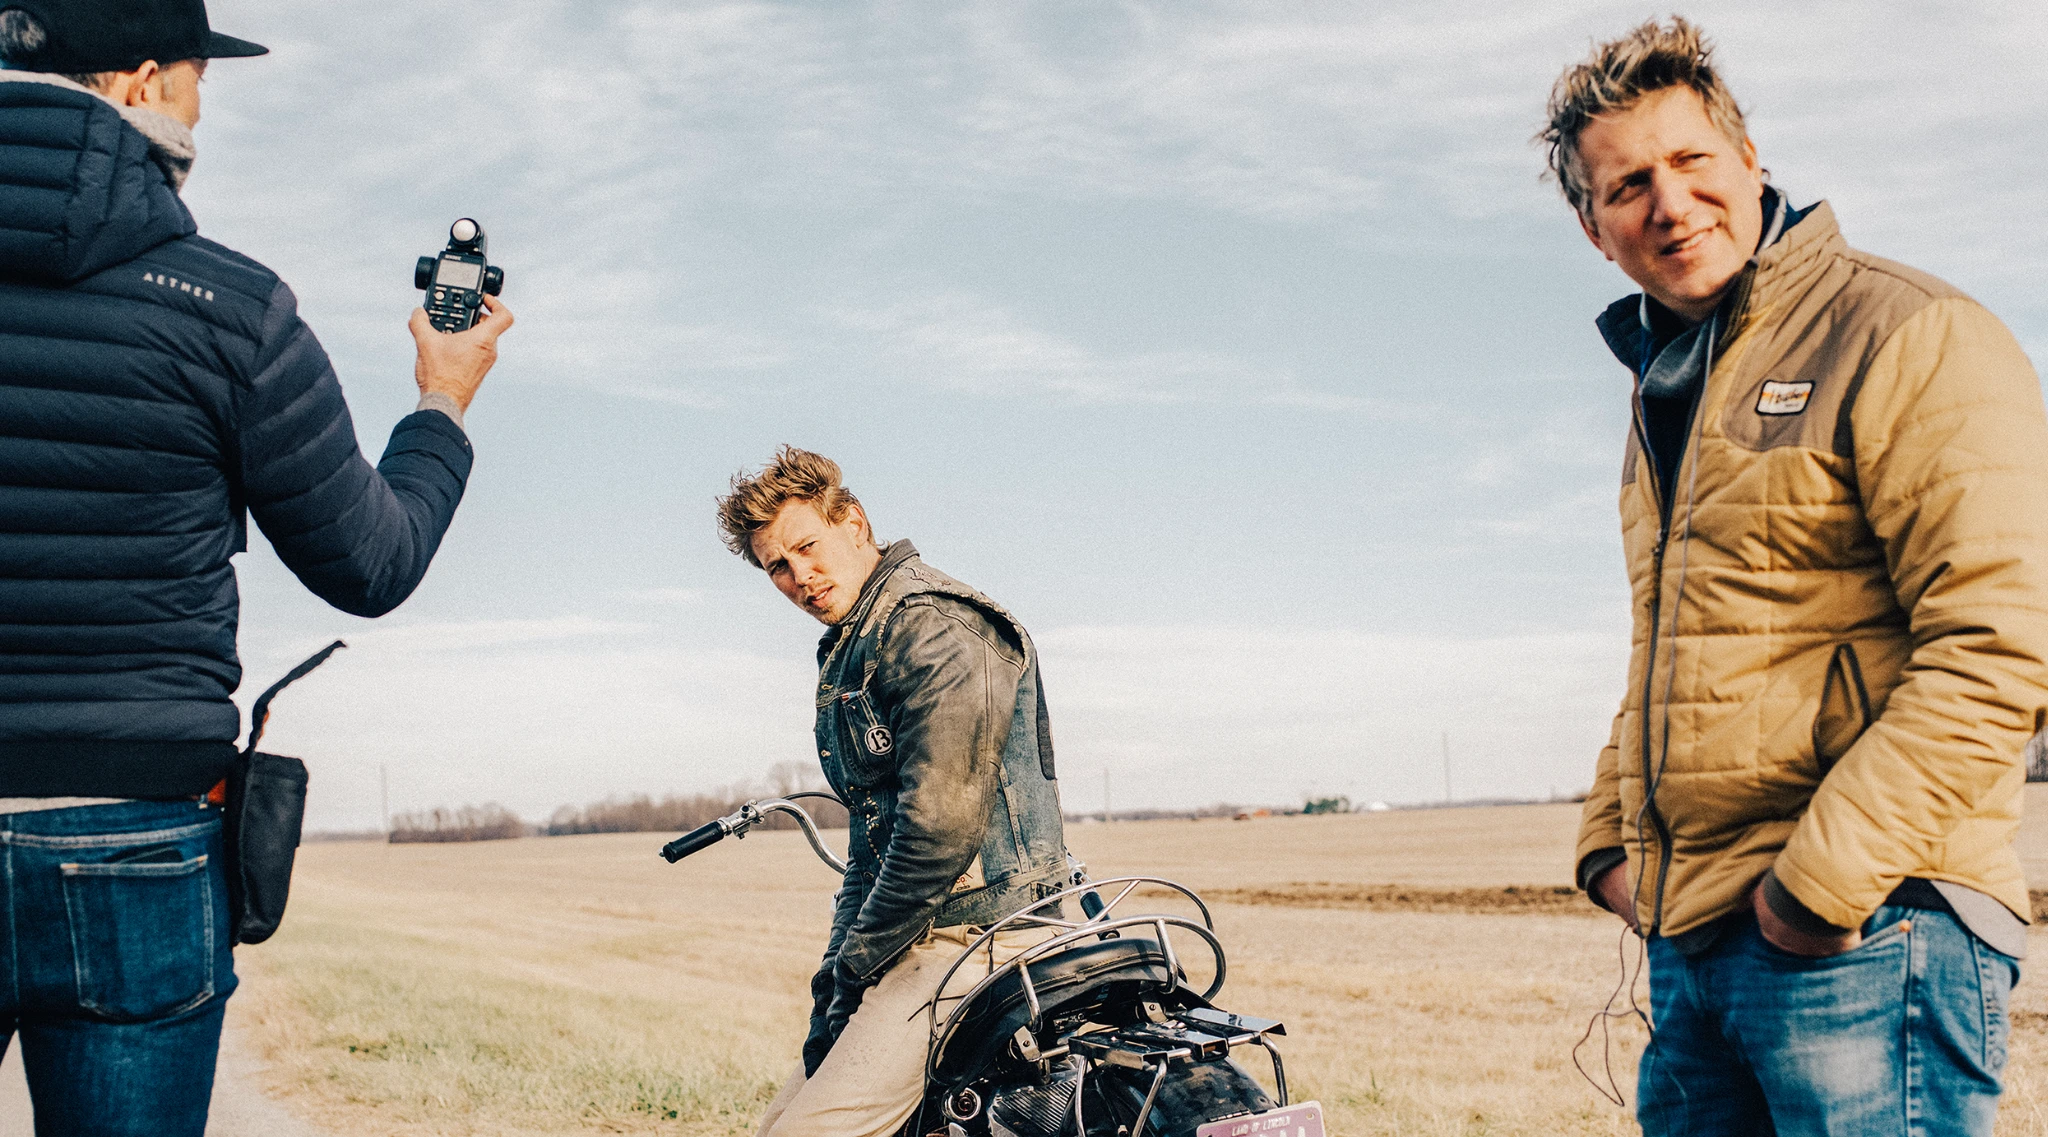 The Bikeriders Starring Austin Butler Set for VOD Release on July 9th